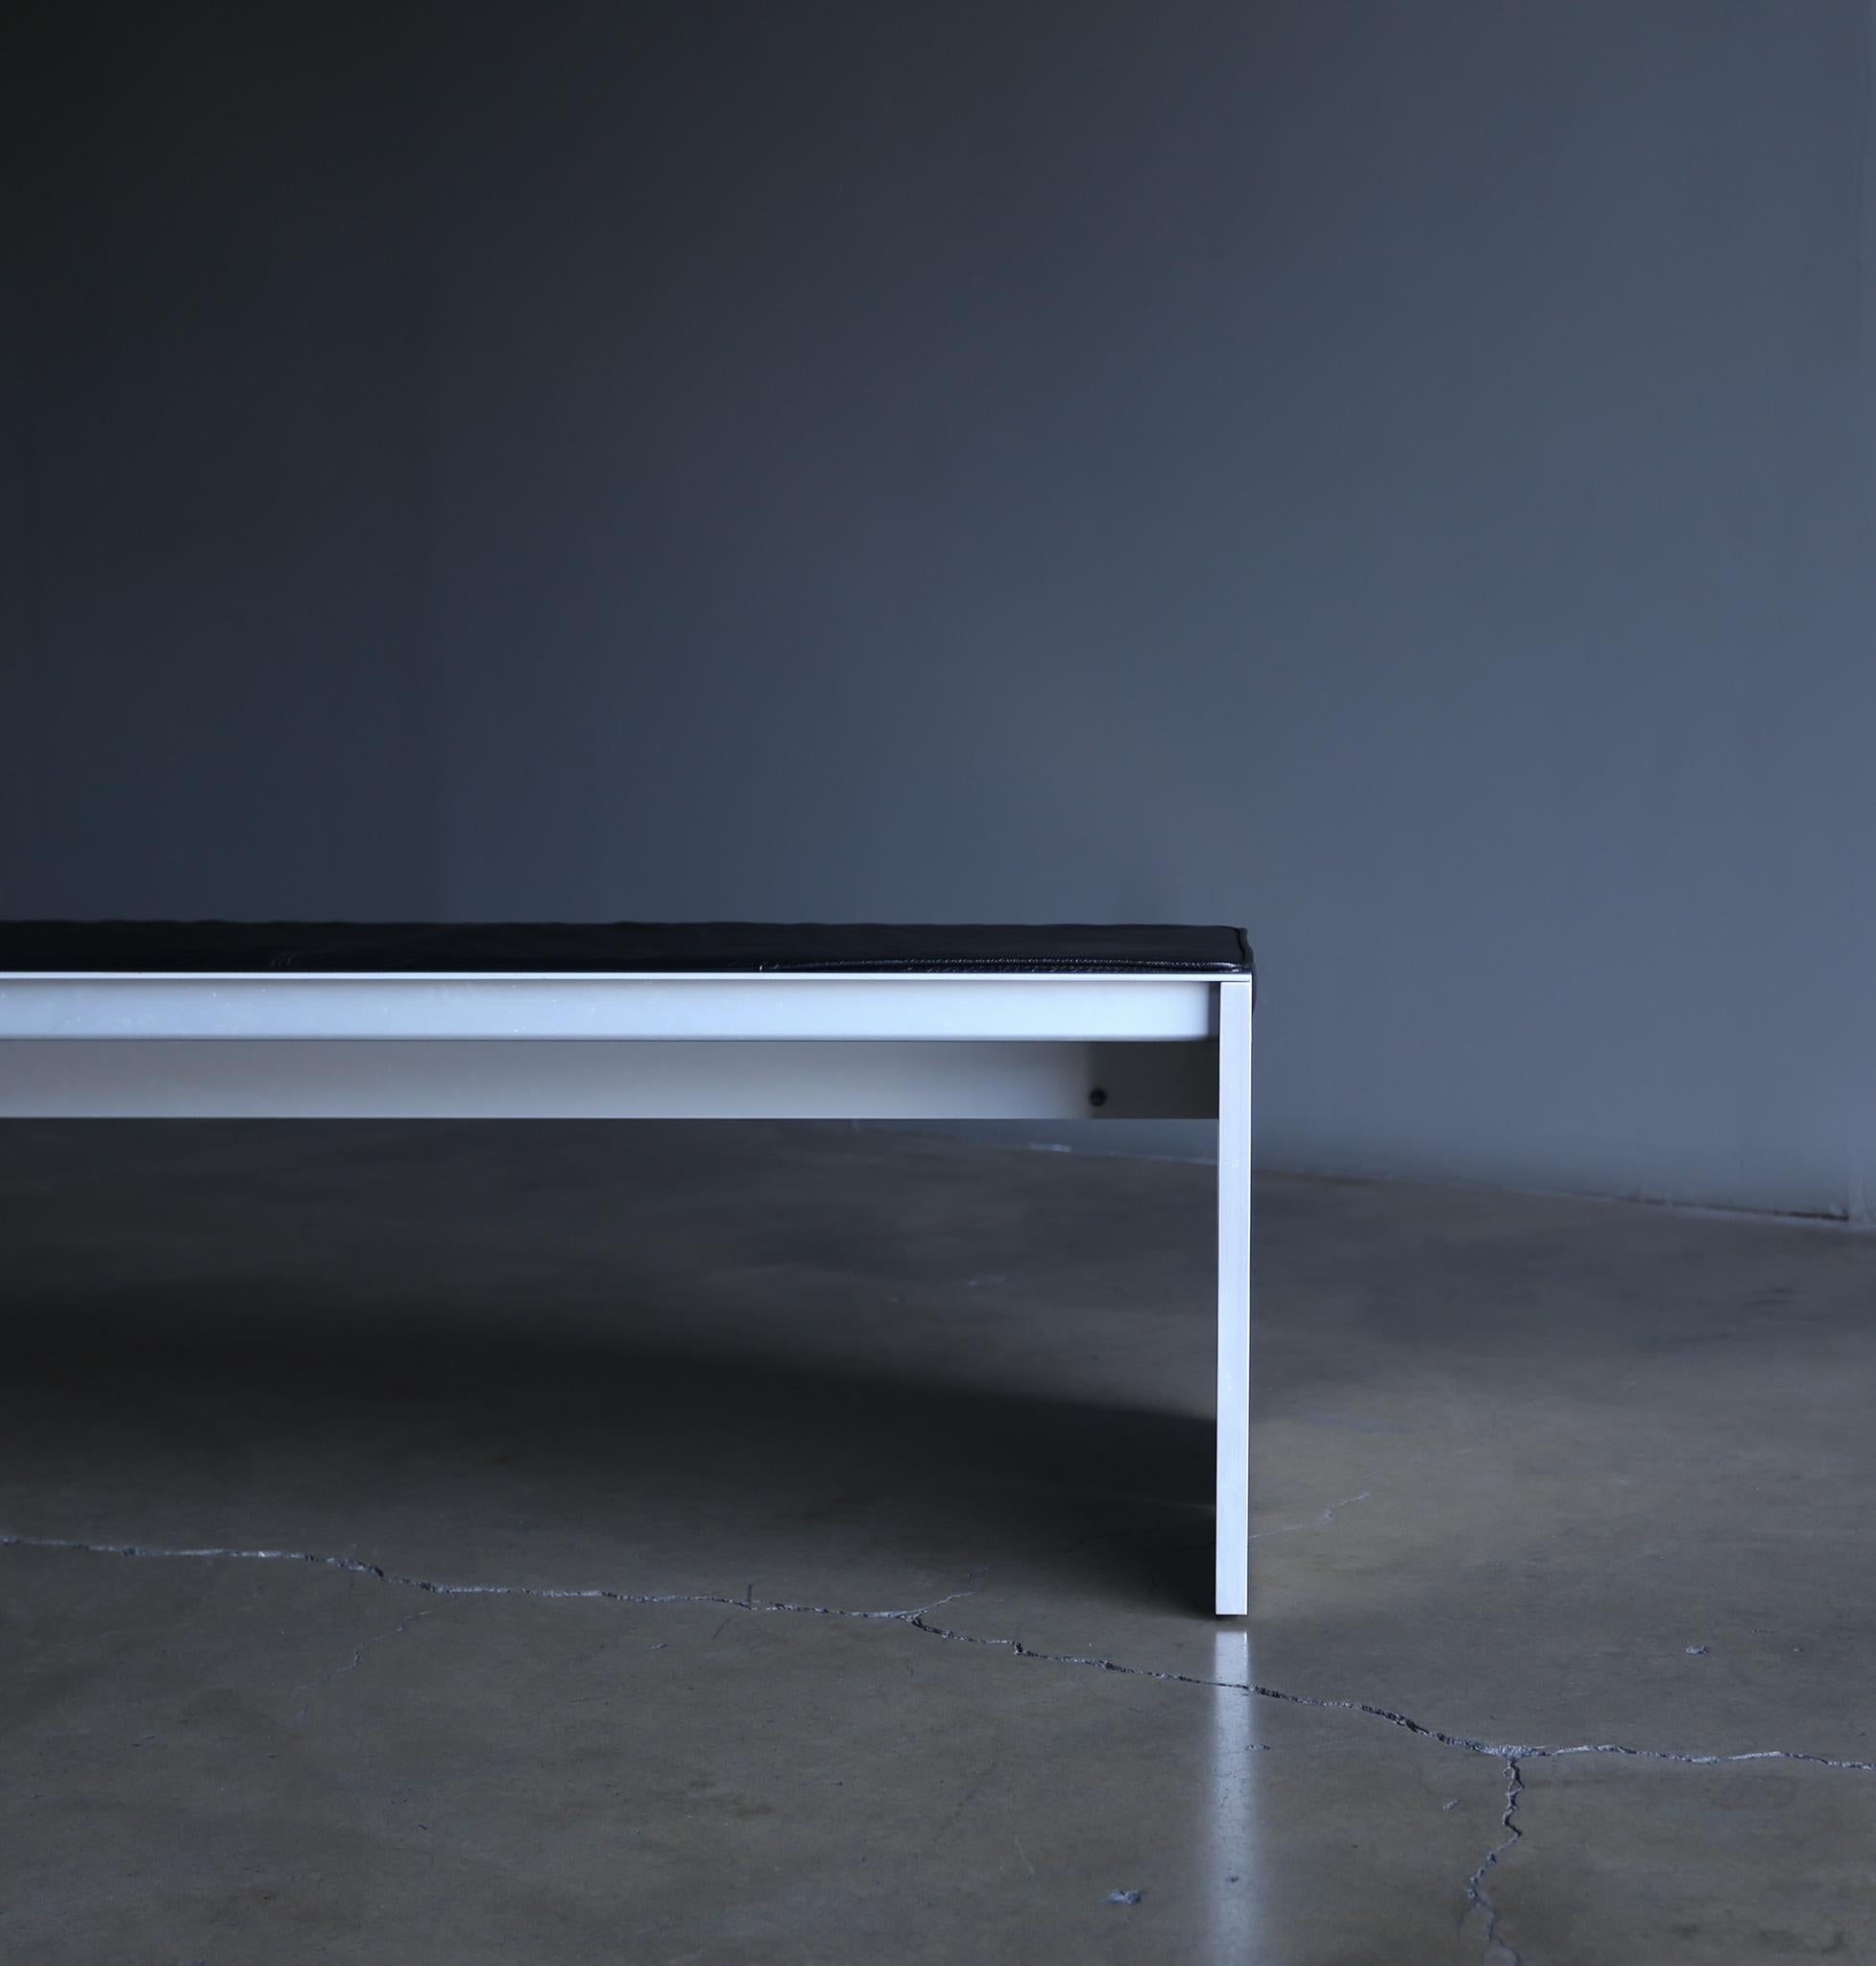 Anodized Wim Quist Kroller Muller Museum Bench by Spectrum, 1990's